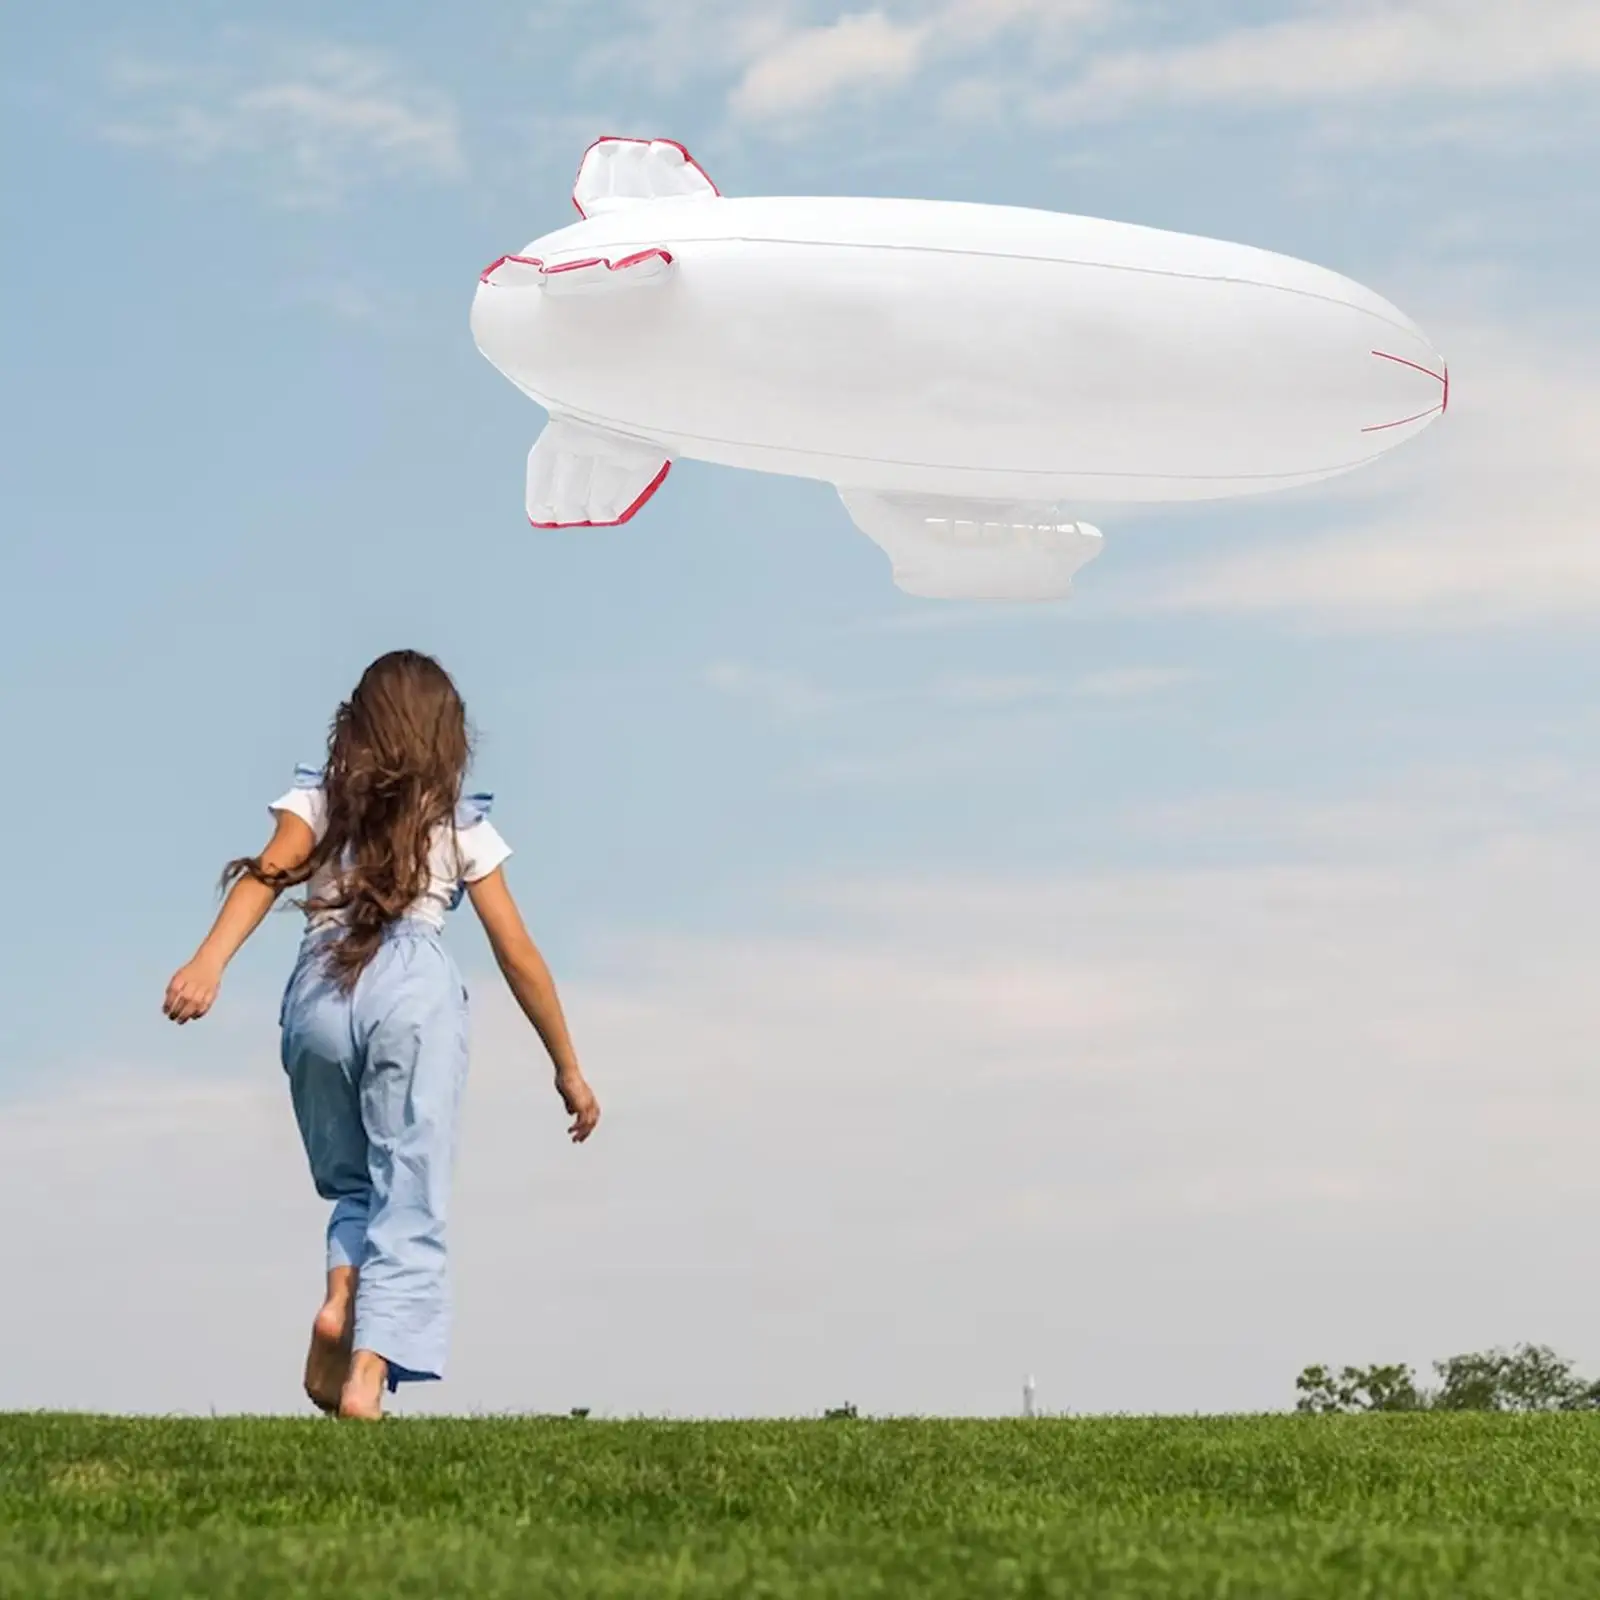 Inflatable Airship Model Save space Unique Aerodynamic Design Airplane Model Hanging for Party Wedding Birthday Ornaments